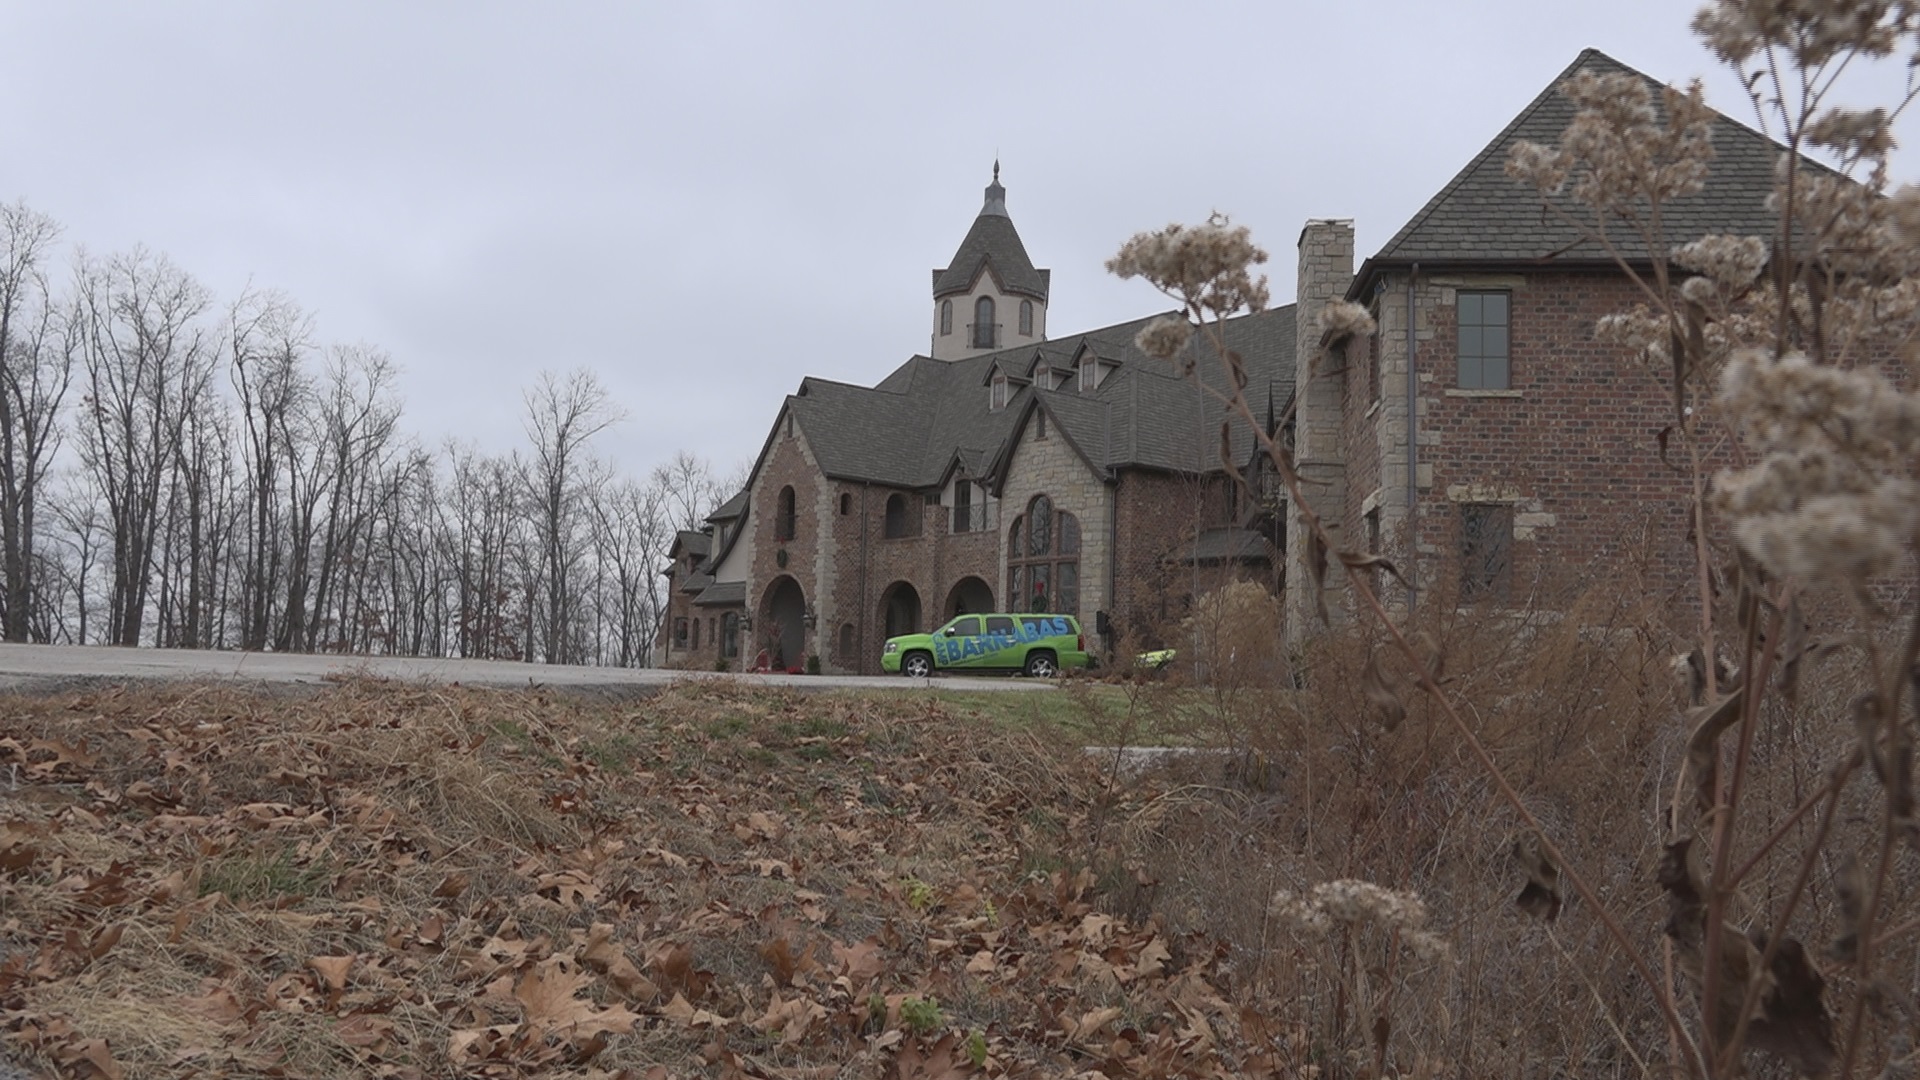 Pitcher Cole Hamels donates Stone County Missouri mansion to Camp Barnabas